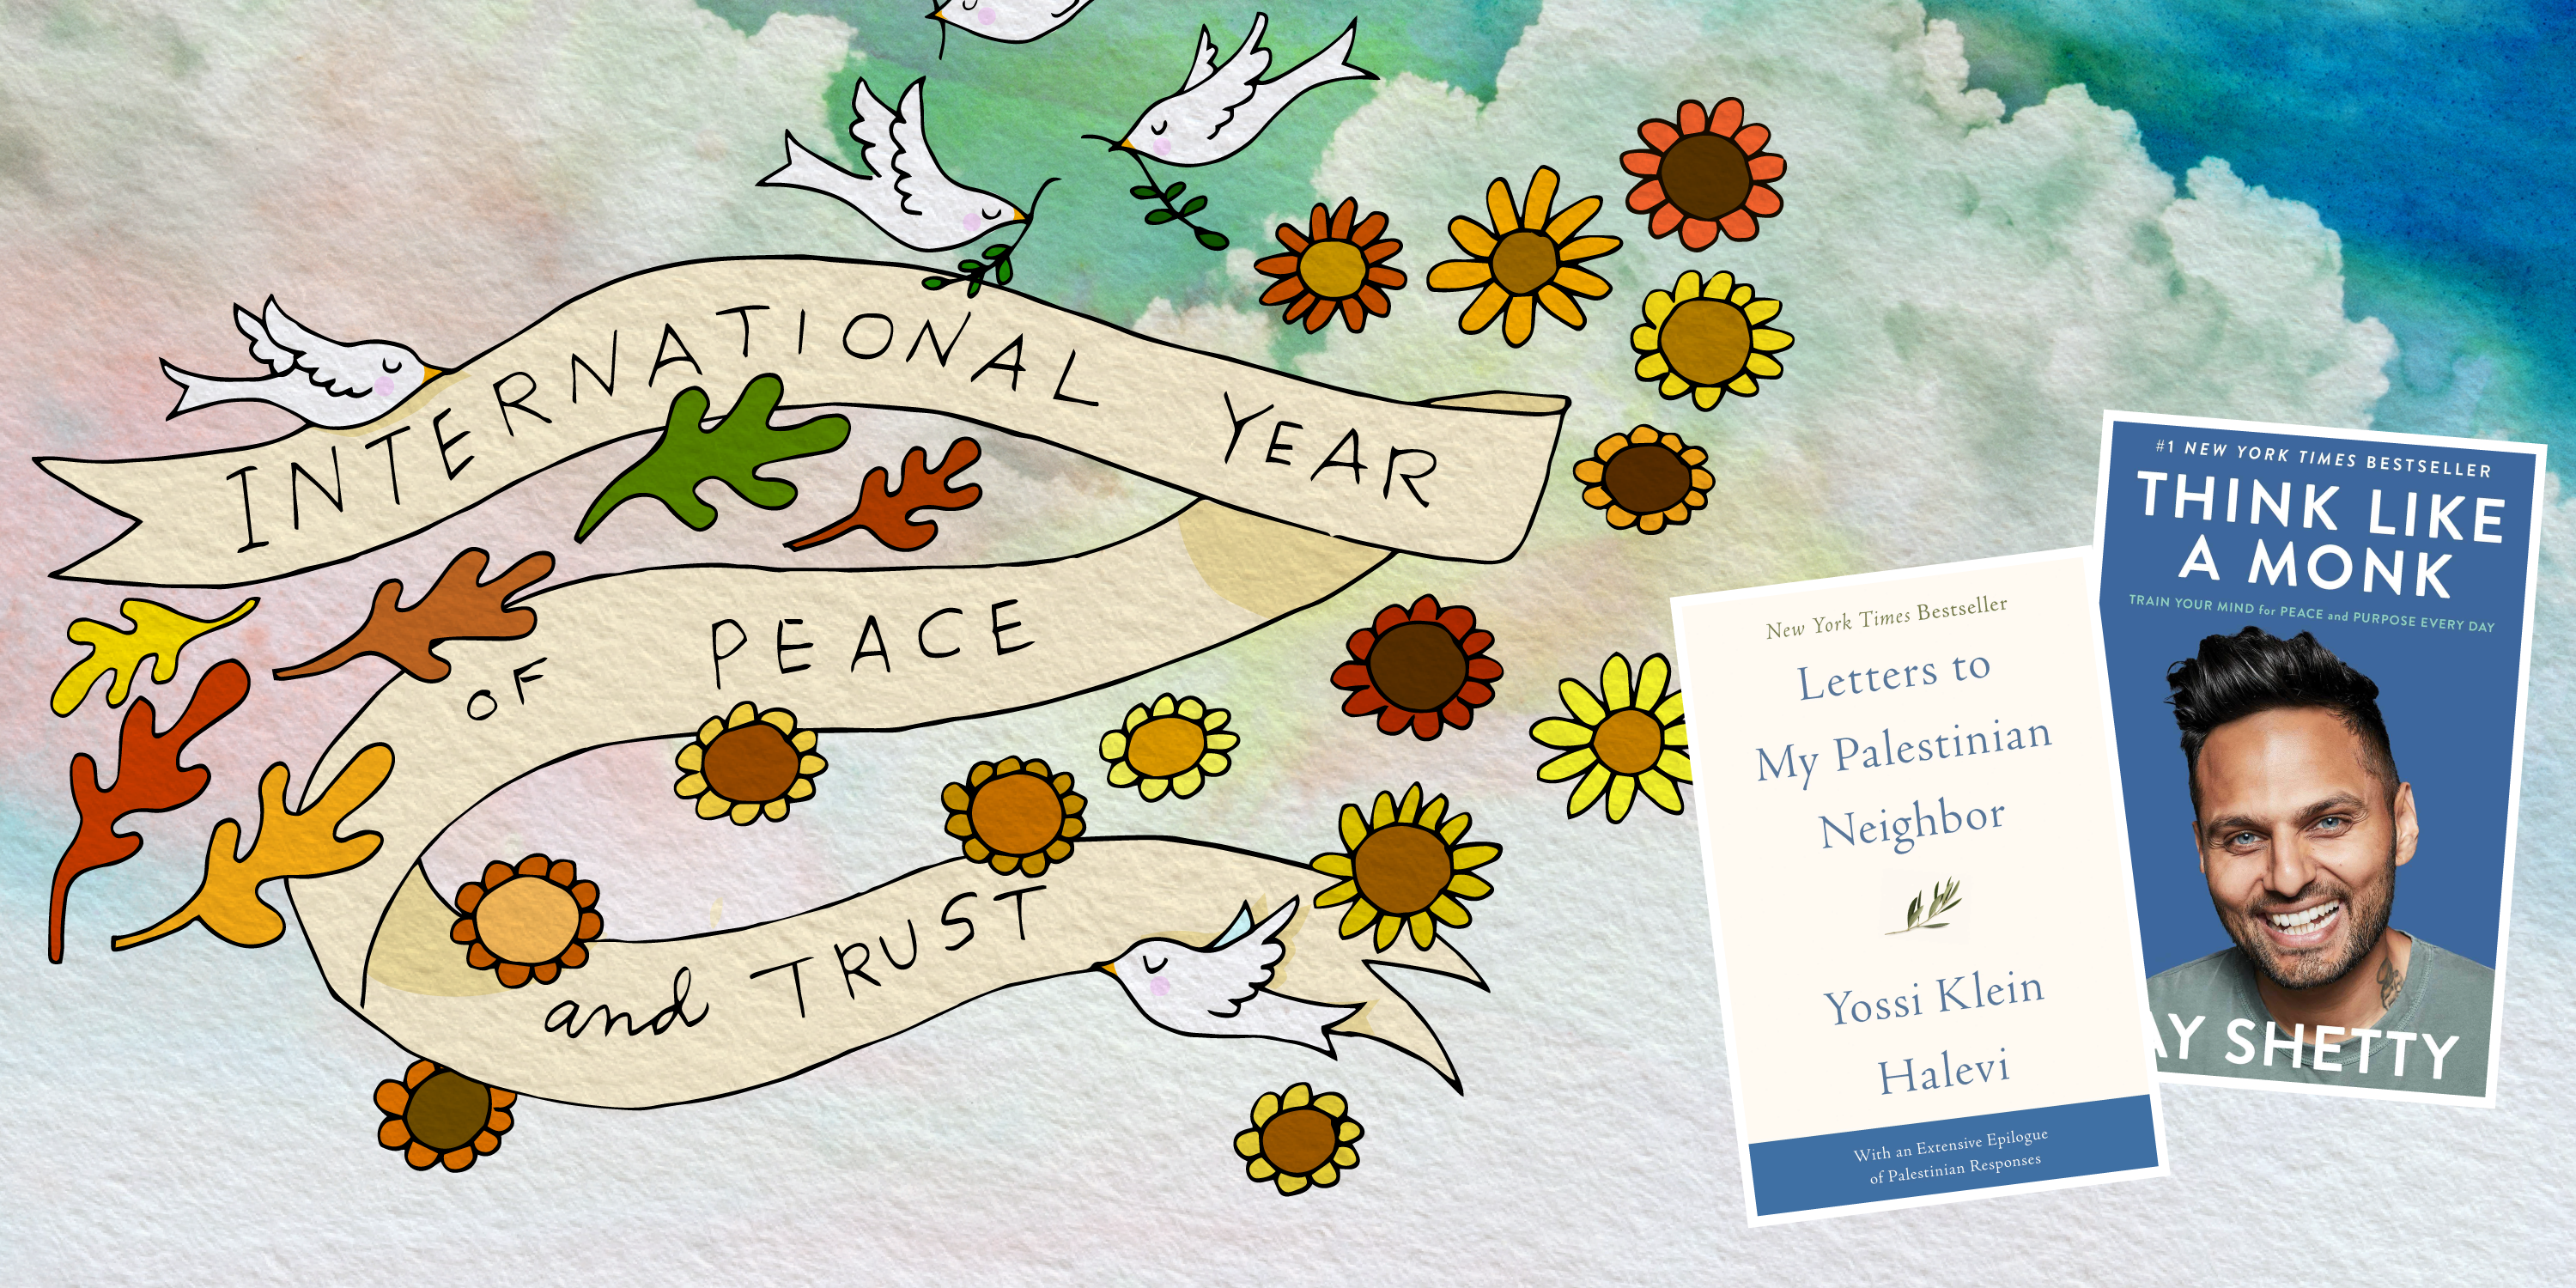 International Year of Peace and Trust: Letters to My Palestinian Neighbor & Think Like a Monk